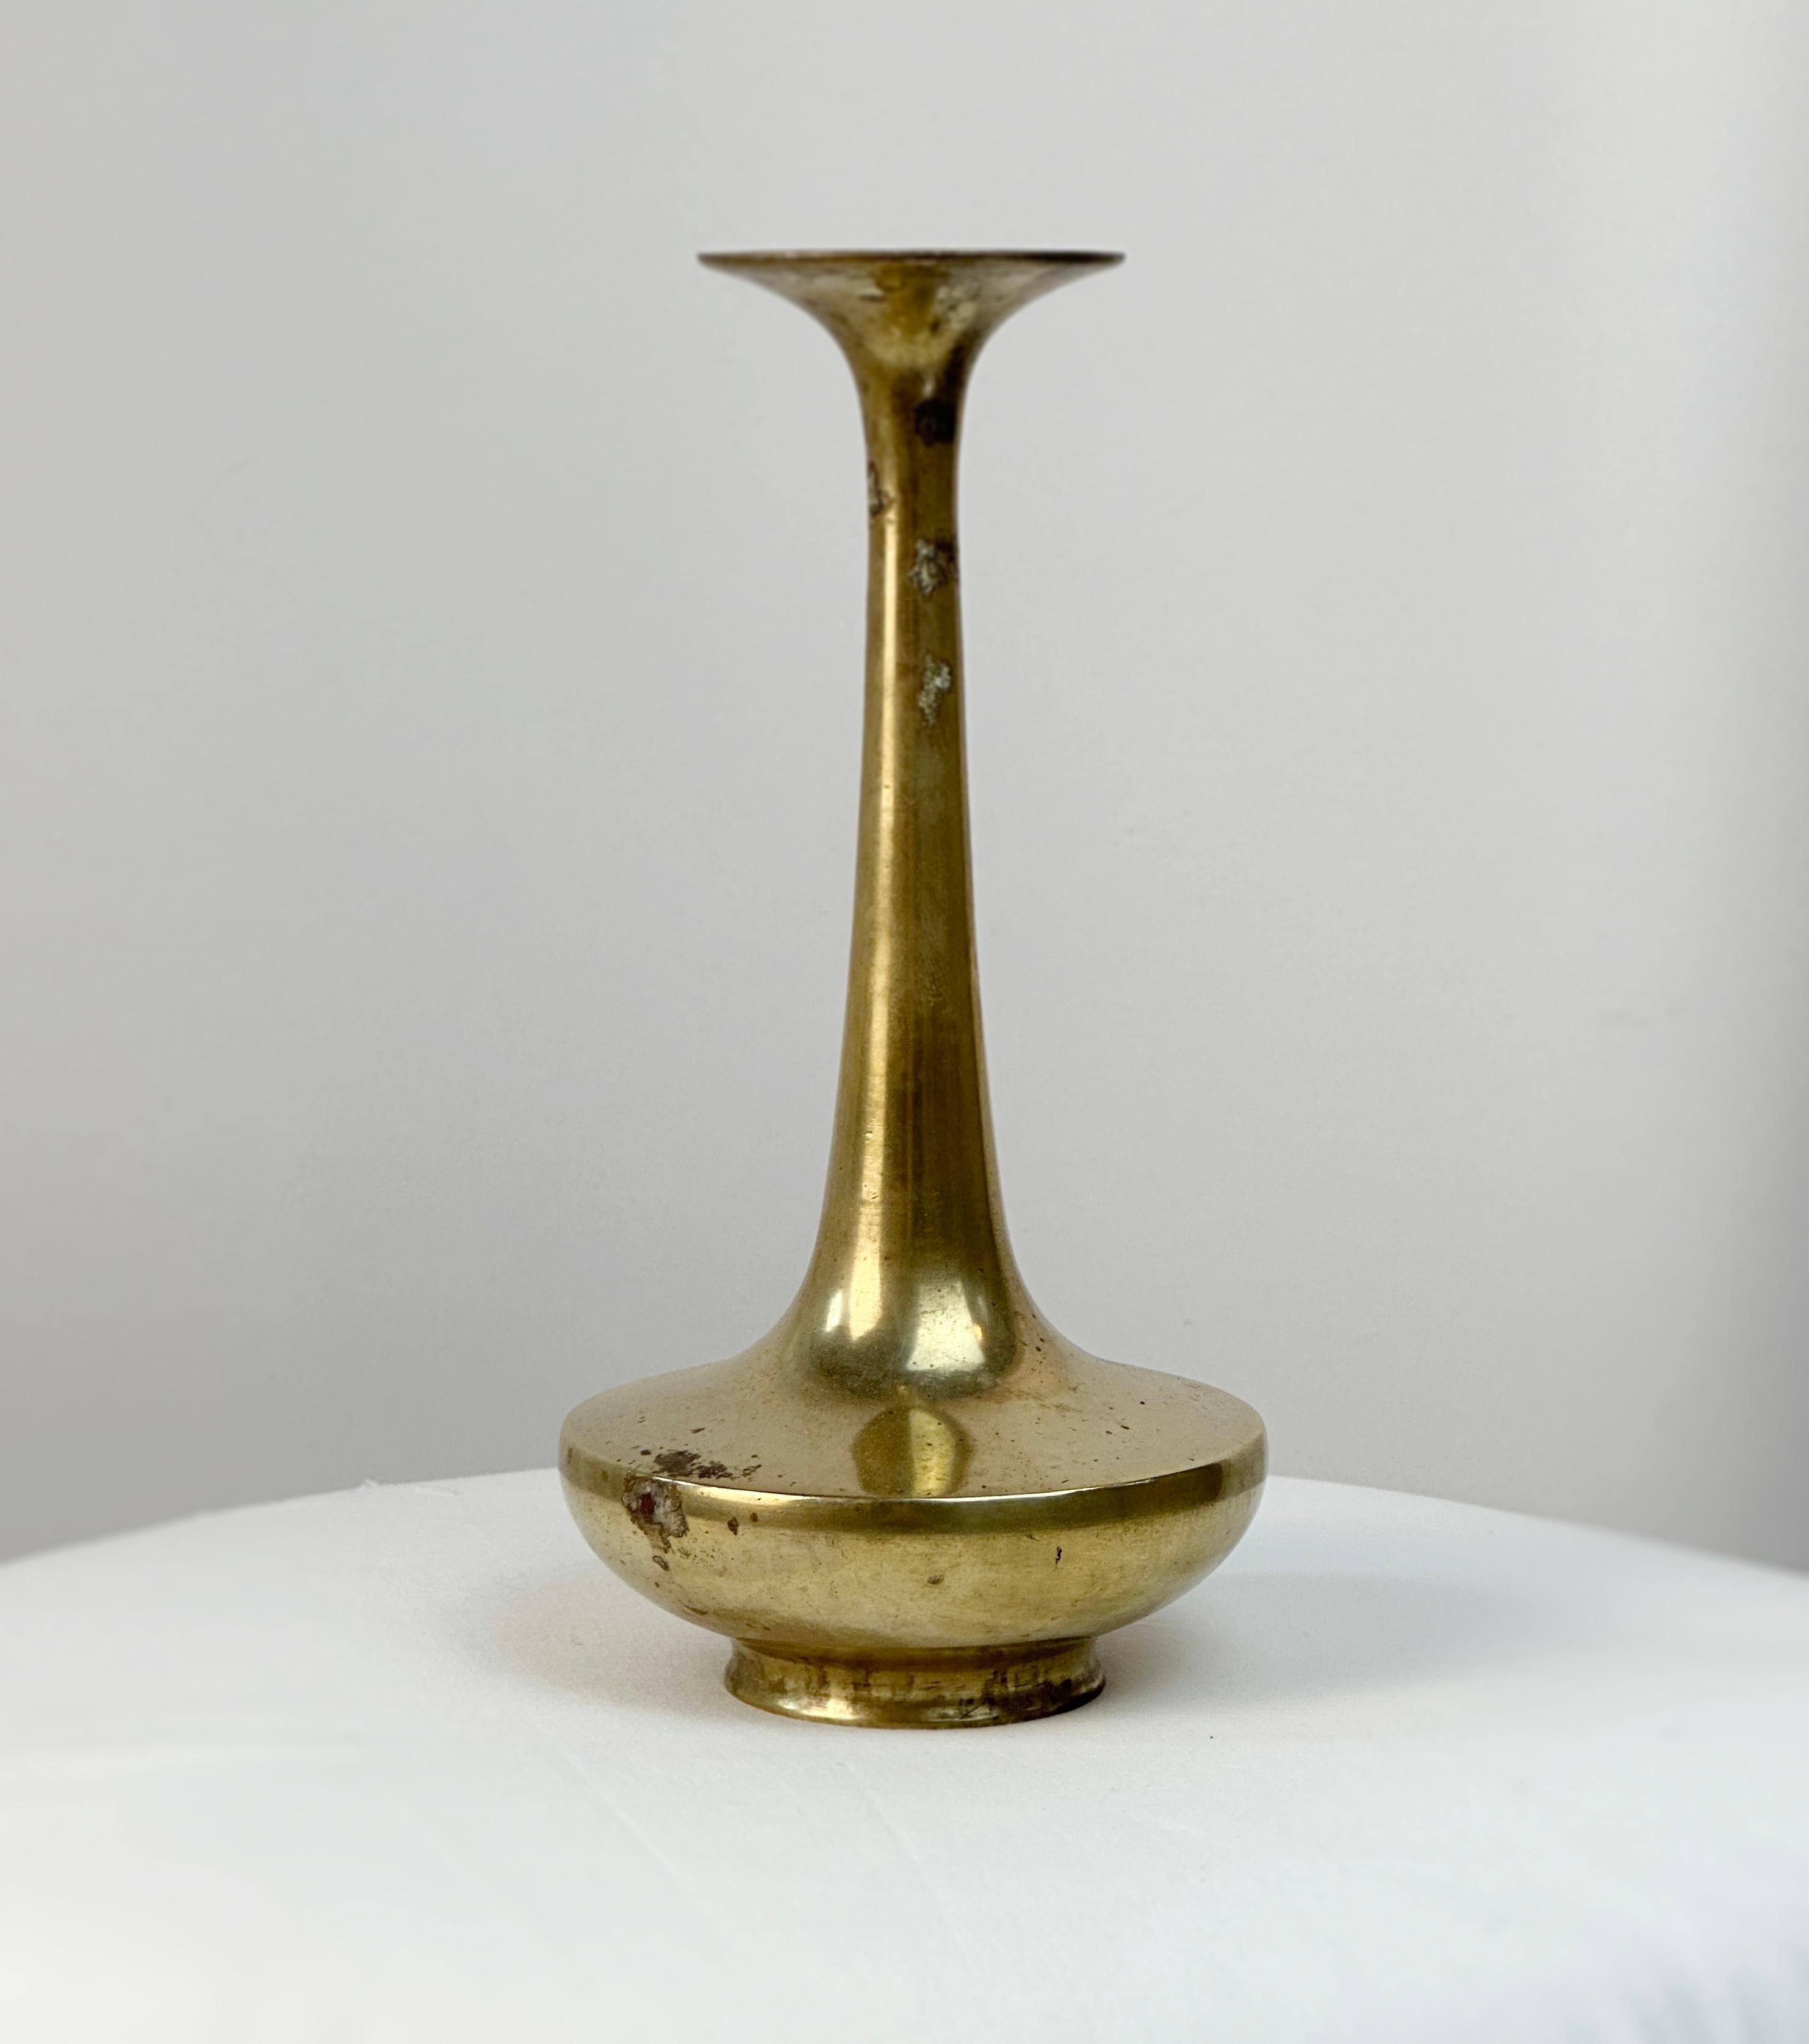 Introducing an exquisite Japanese brass ikebana bud vase from the early 1920s

This elegant vase is a testament to Japanese craftsmanship, capturing the essence of simplicity and refinement. Crafted from brass, it exudes a warm, inviting glow that